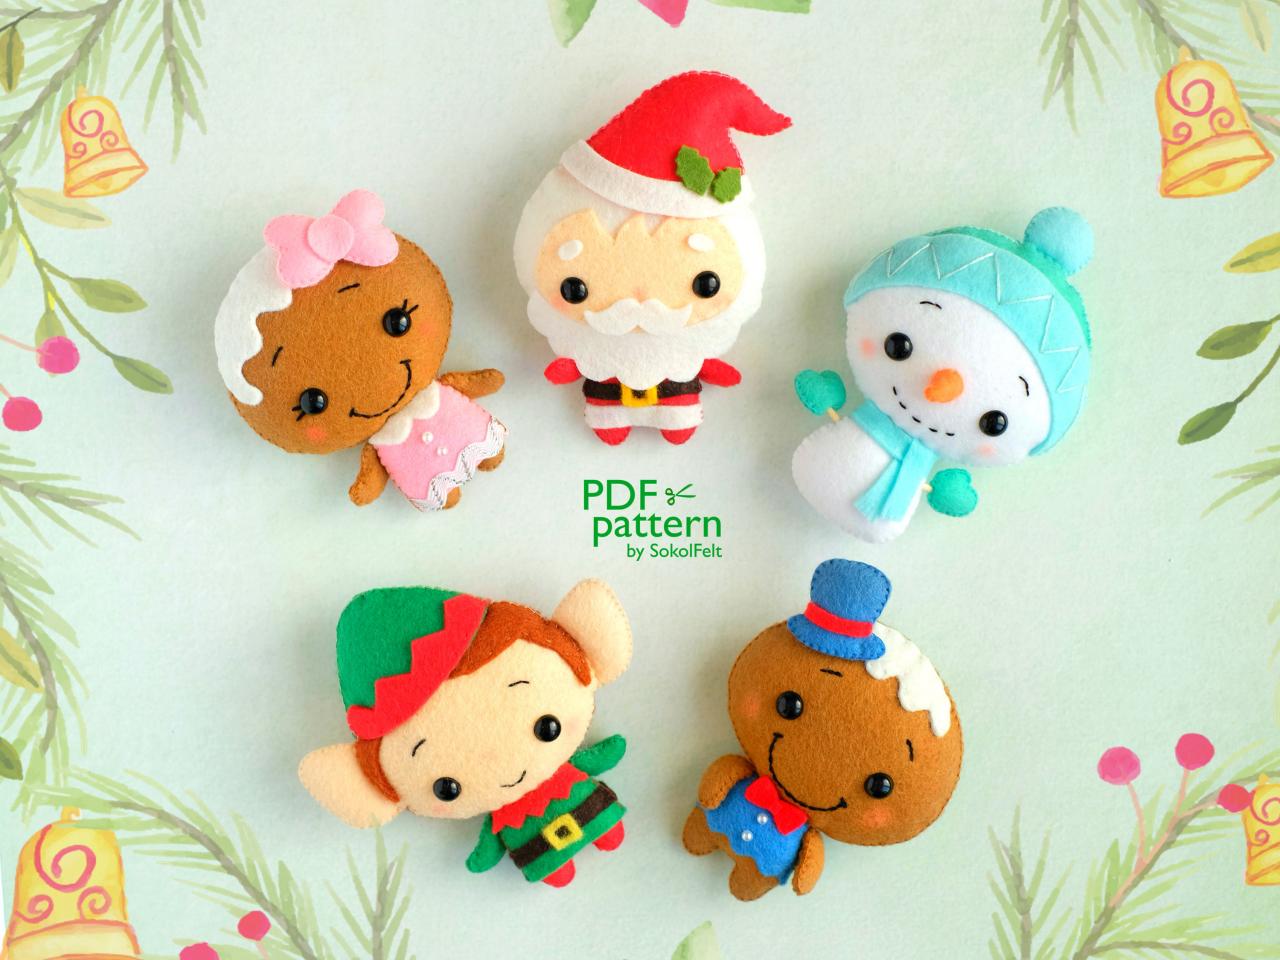 Set of Felt Christmas toy sewing PDF and SVG patterns, Santa, Elf, Snowman, Mr. and Mrs. Gingerbread plush ornaments, Felt baby mobile